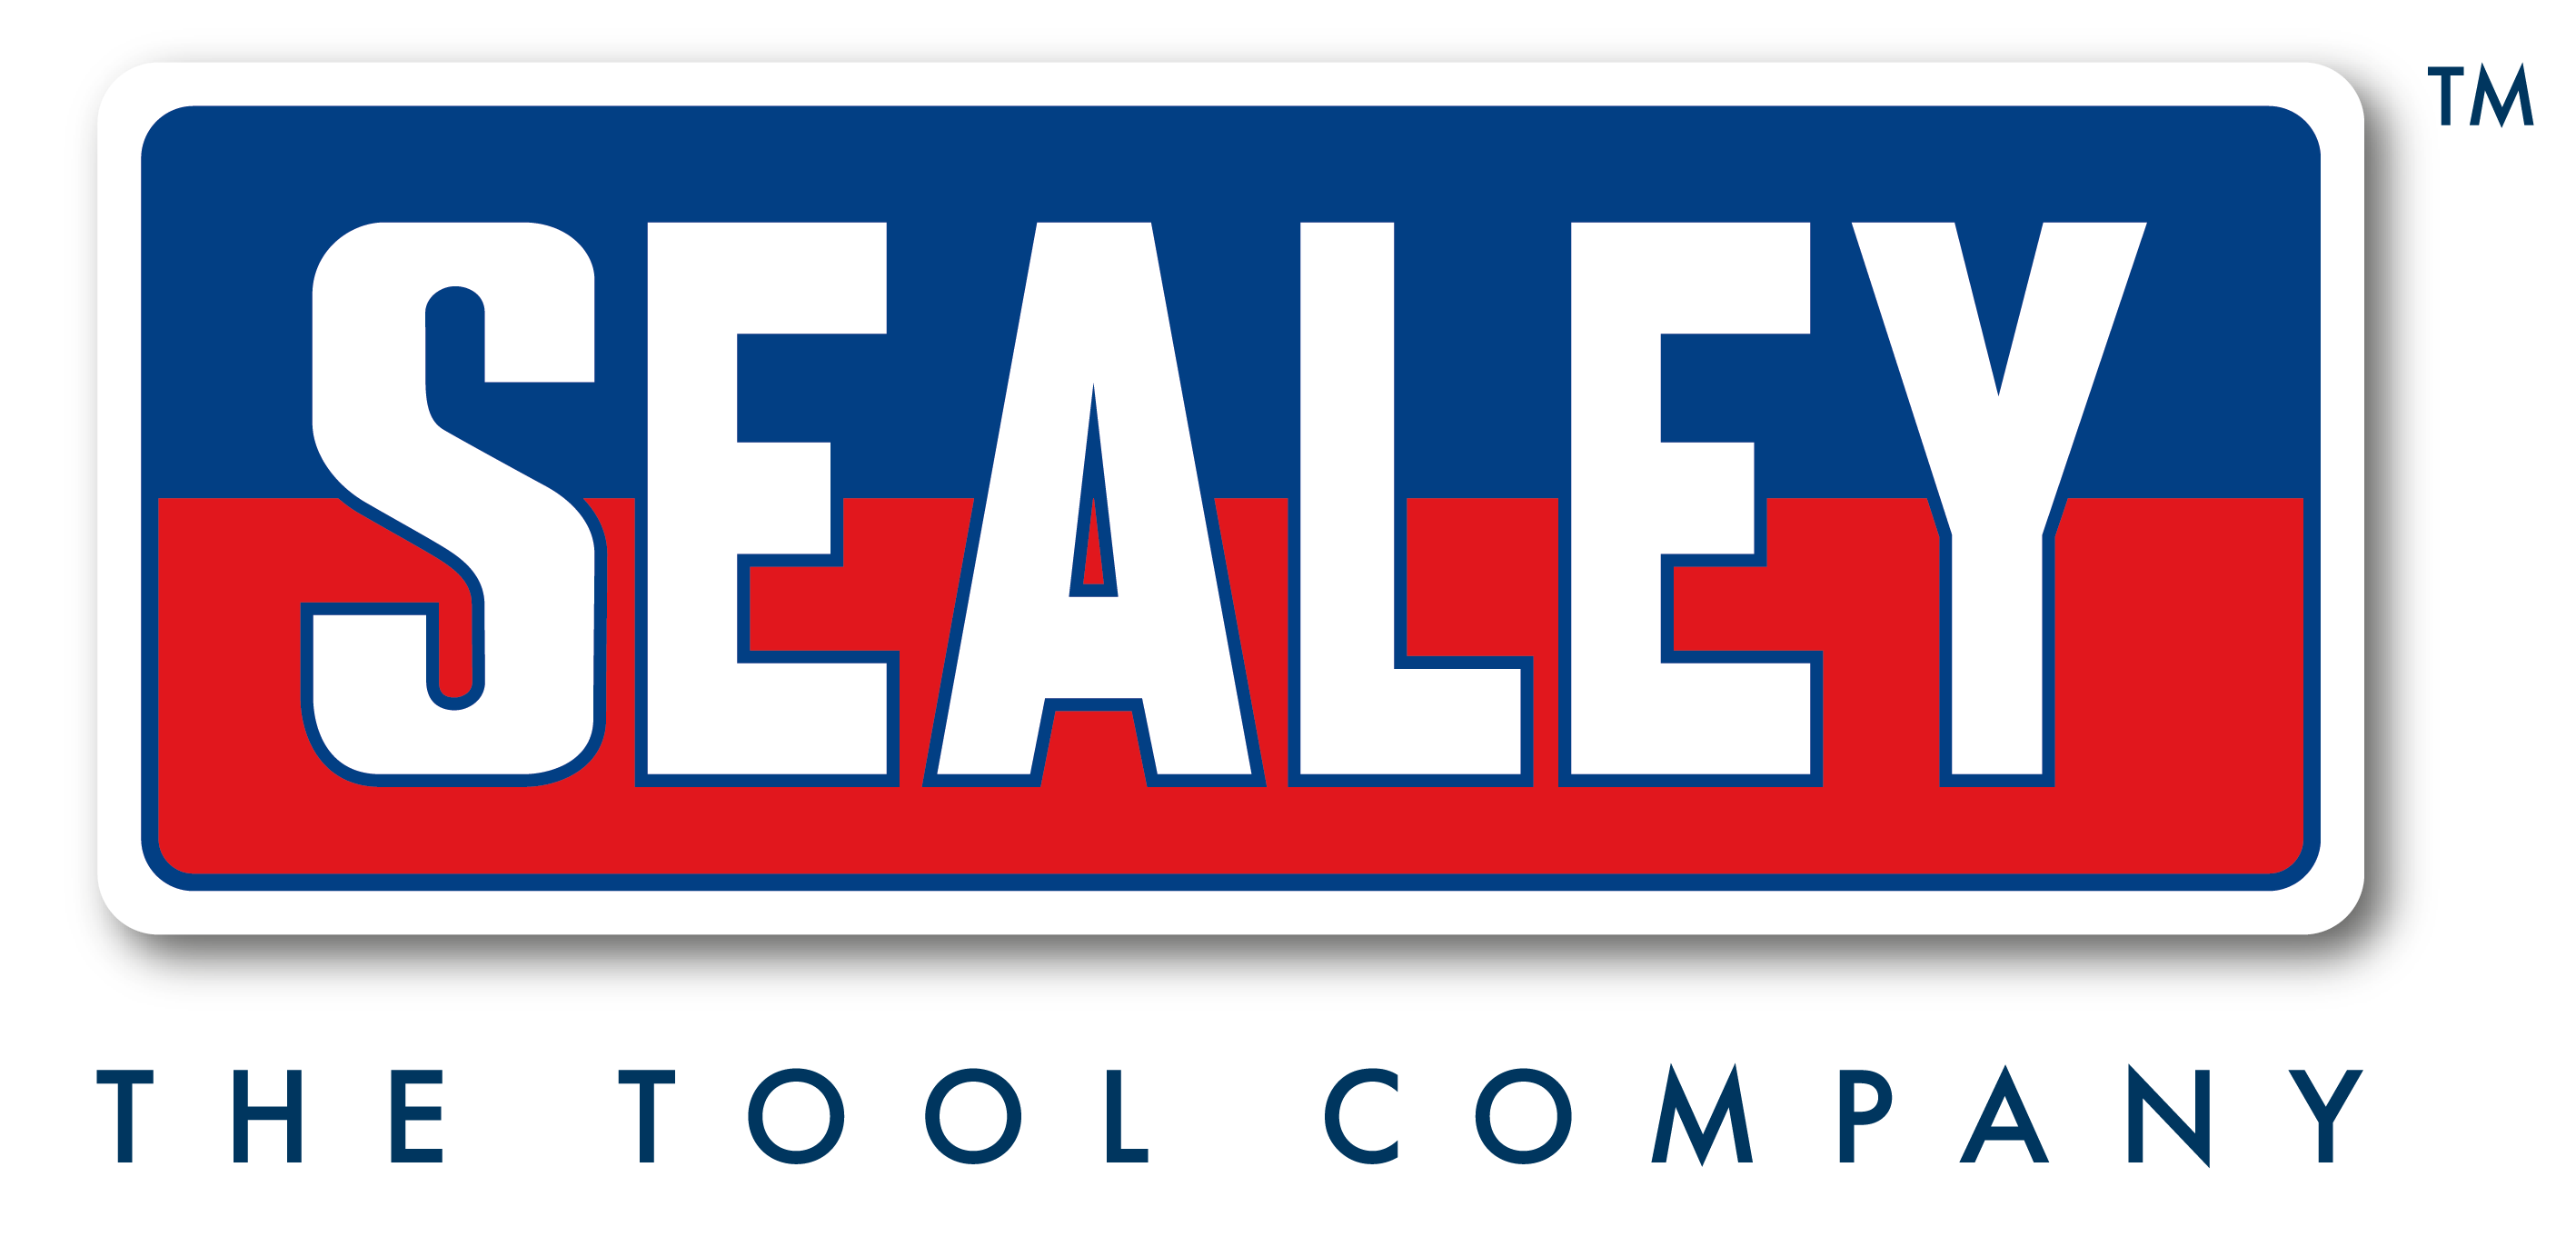 Sealey Group